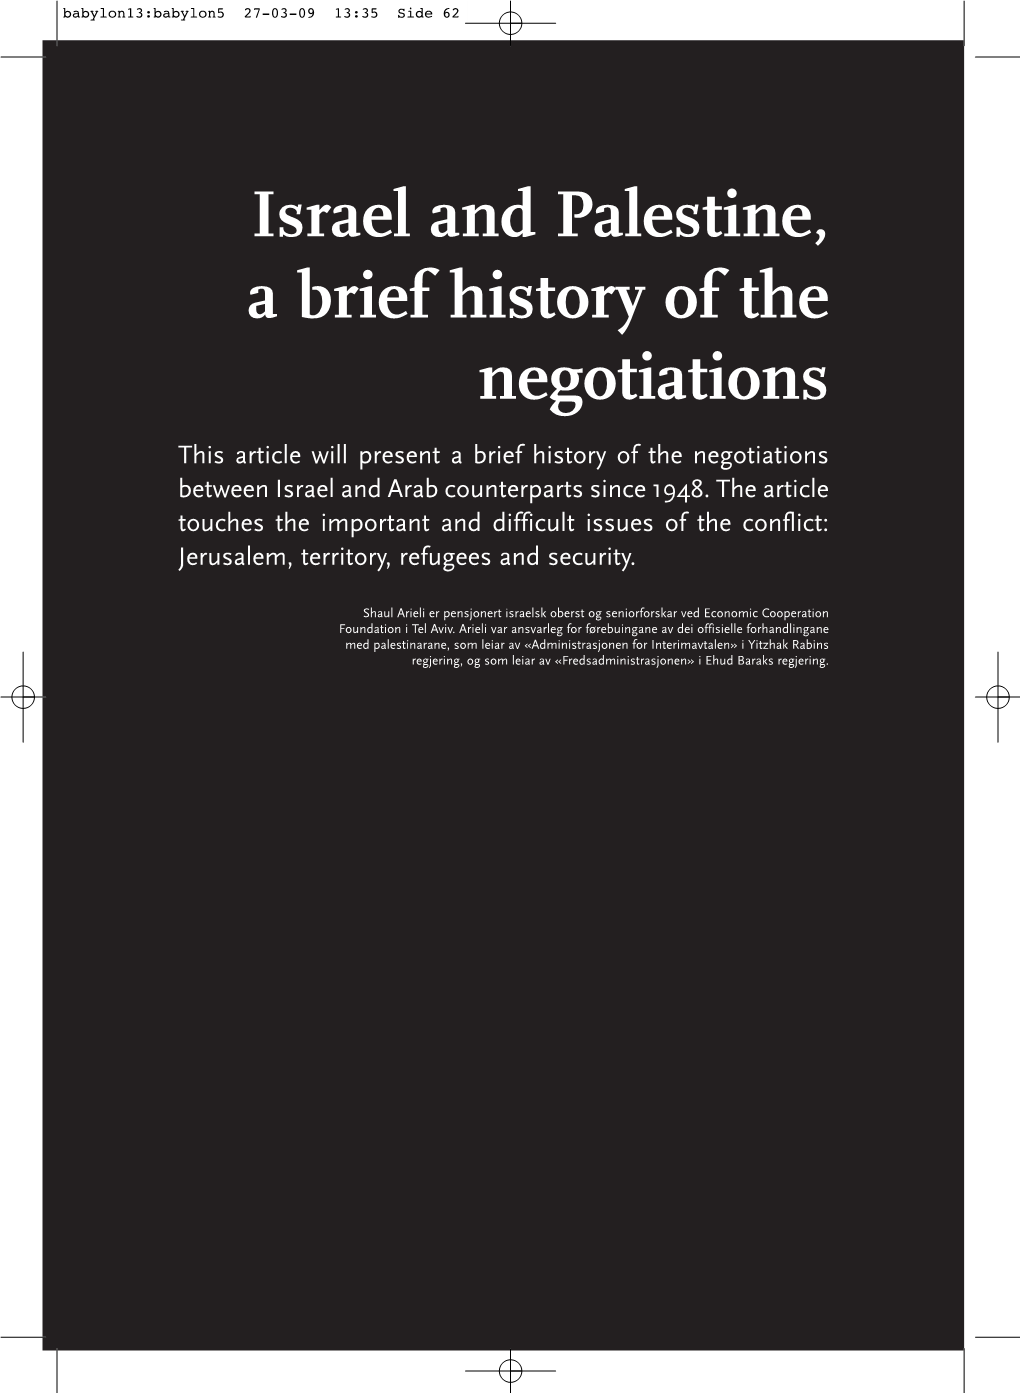 Israel and Palestine, a Brief History of the Negotiations